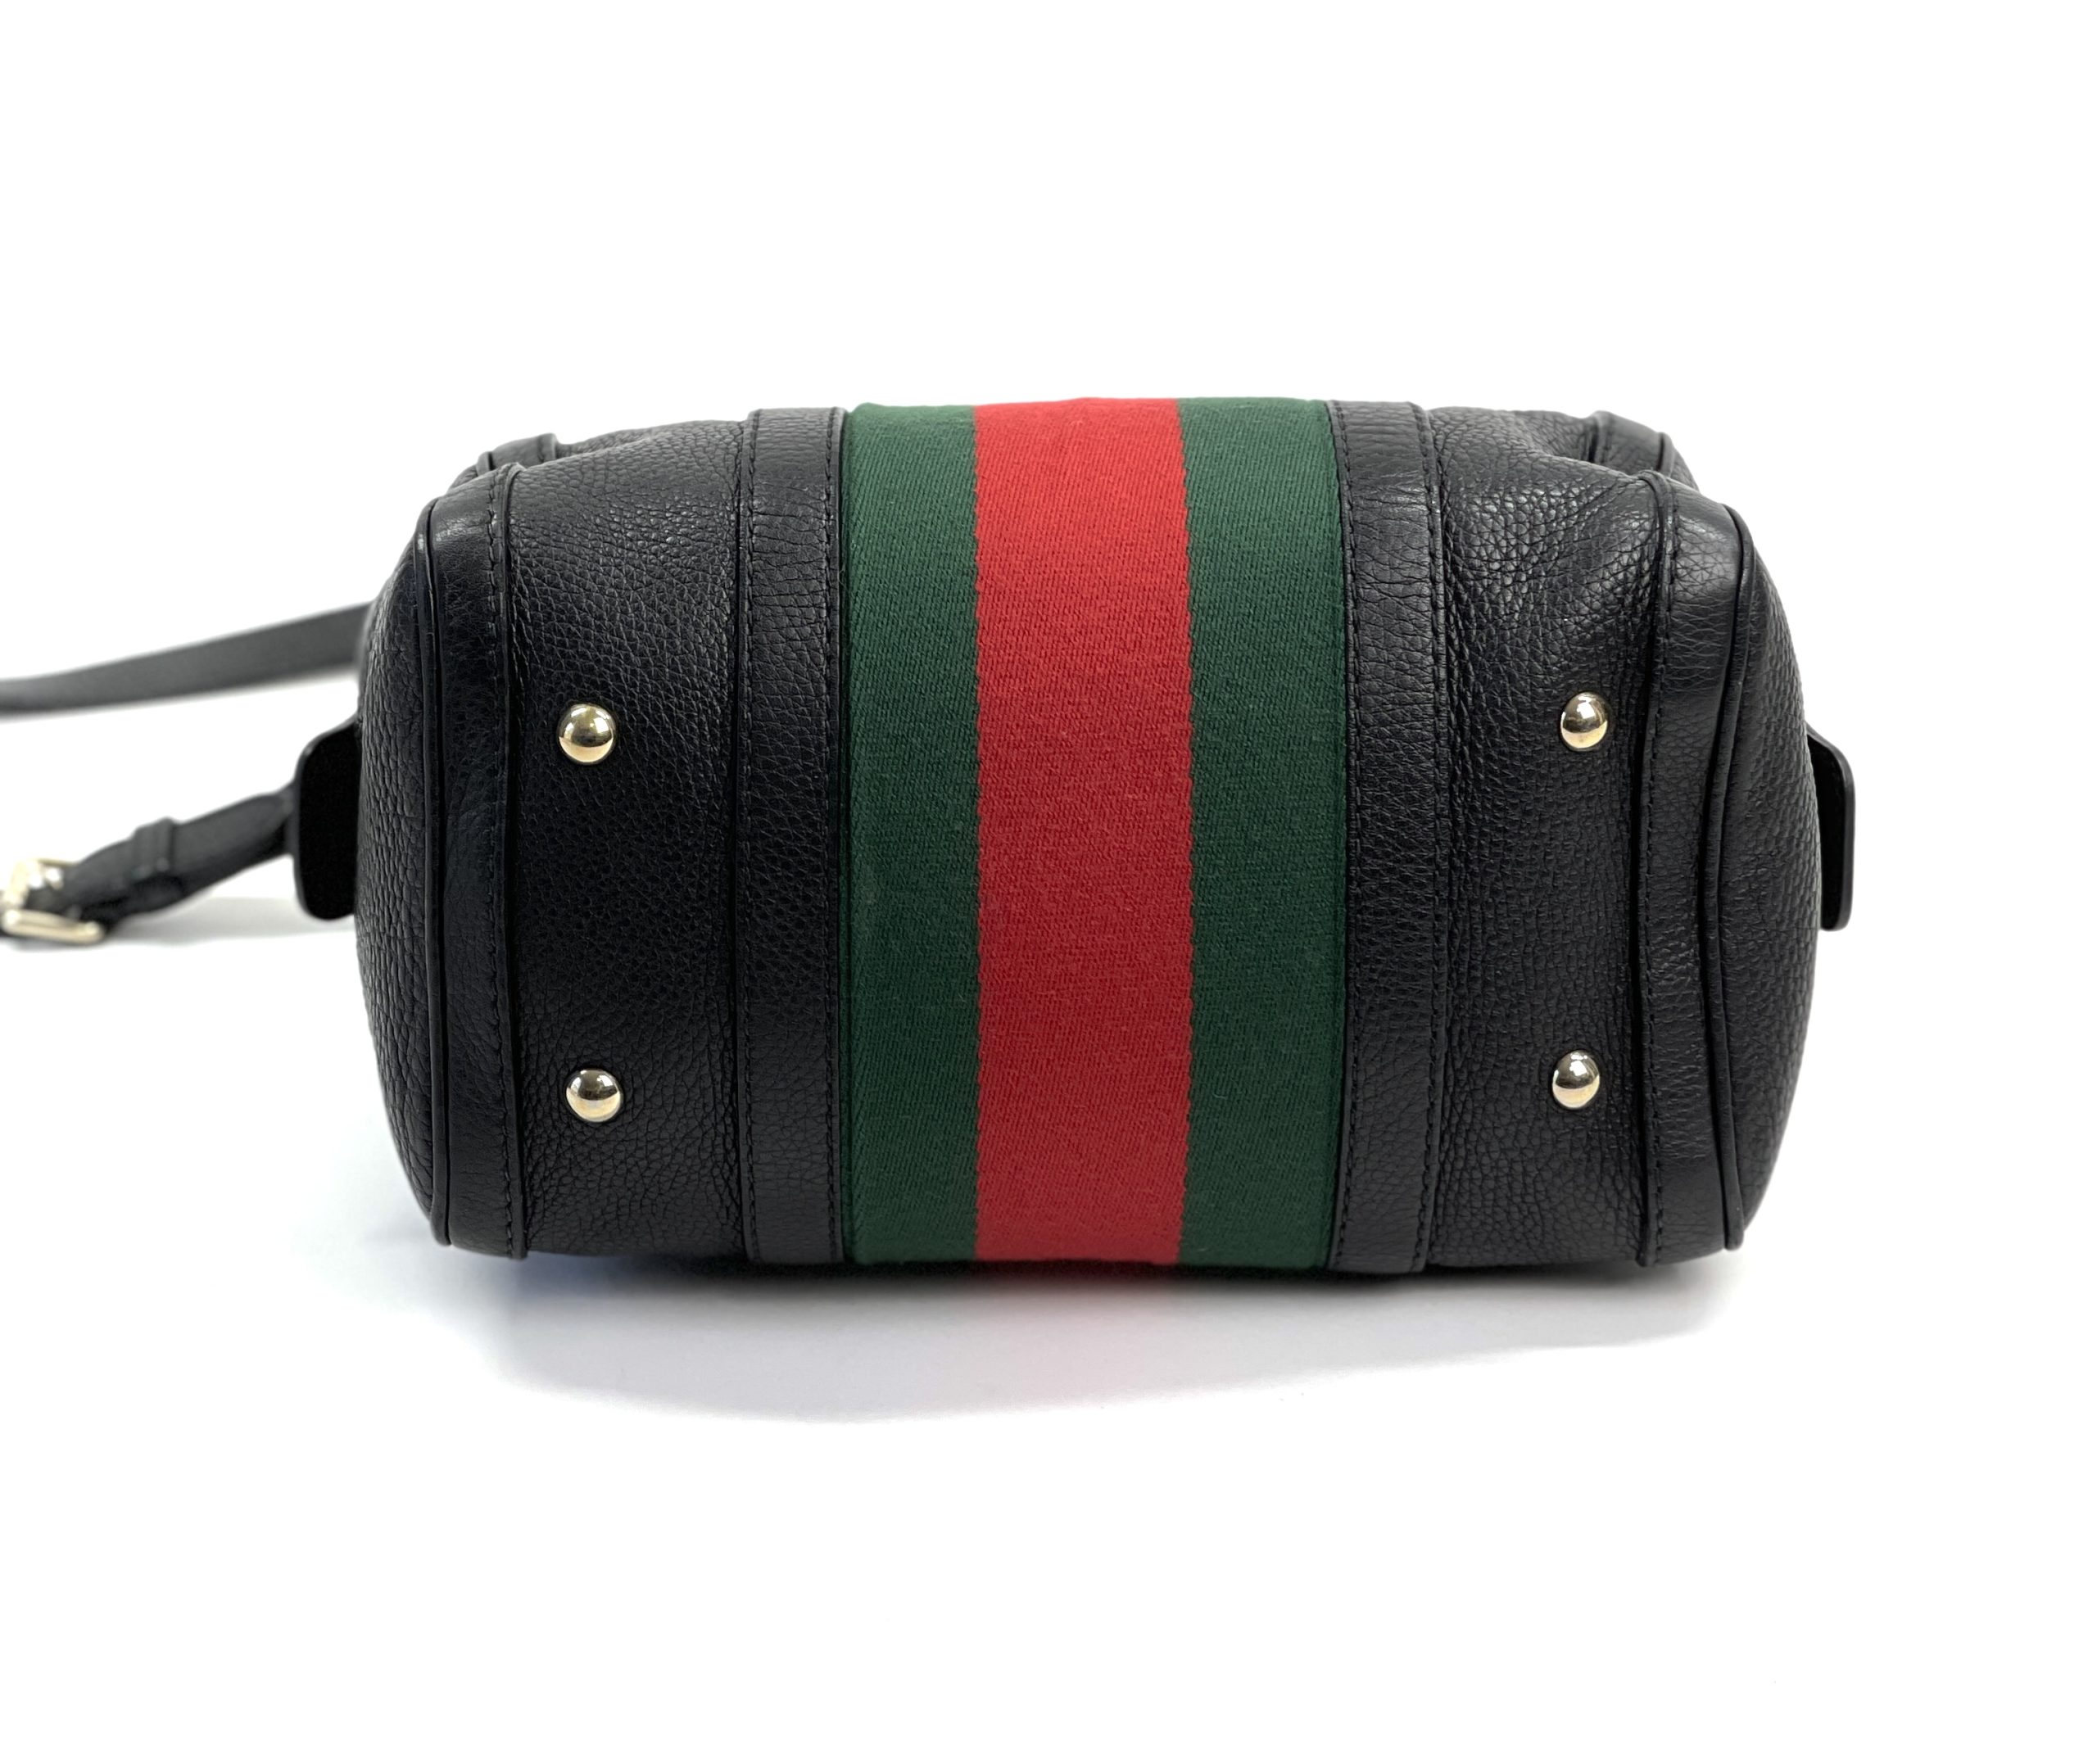 Boston leather bowling bag Gucci Black in Leather - 30421914